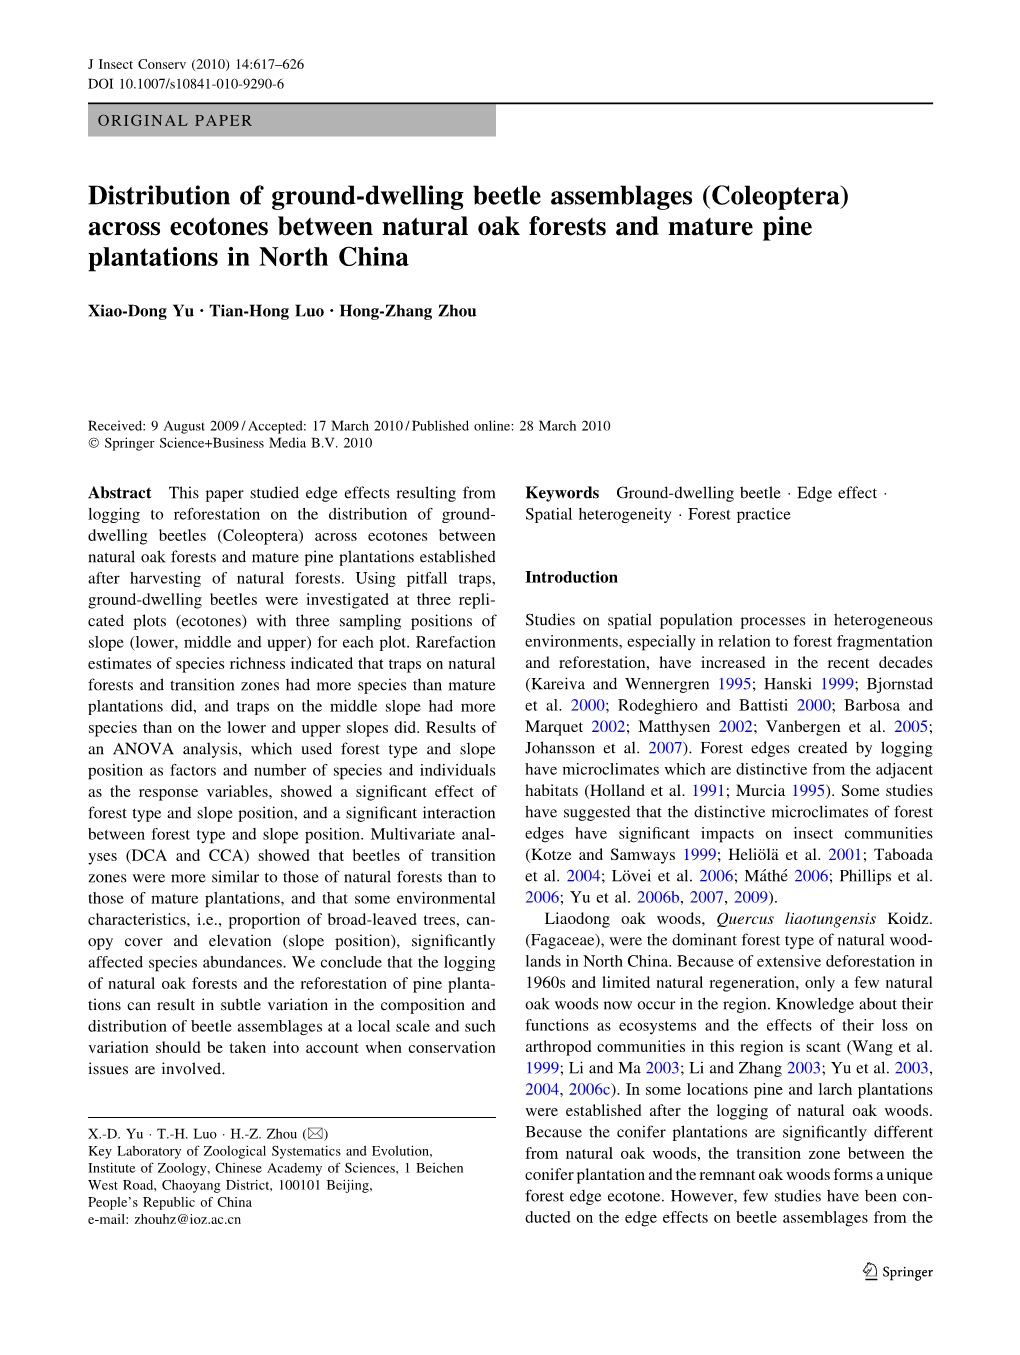 Distribution of Ground-Dwelling Beetle Assemblages (Coleoptera) Across Ecotones Between Natural Oak Forests and Mature Pine Plantations in North China